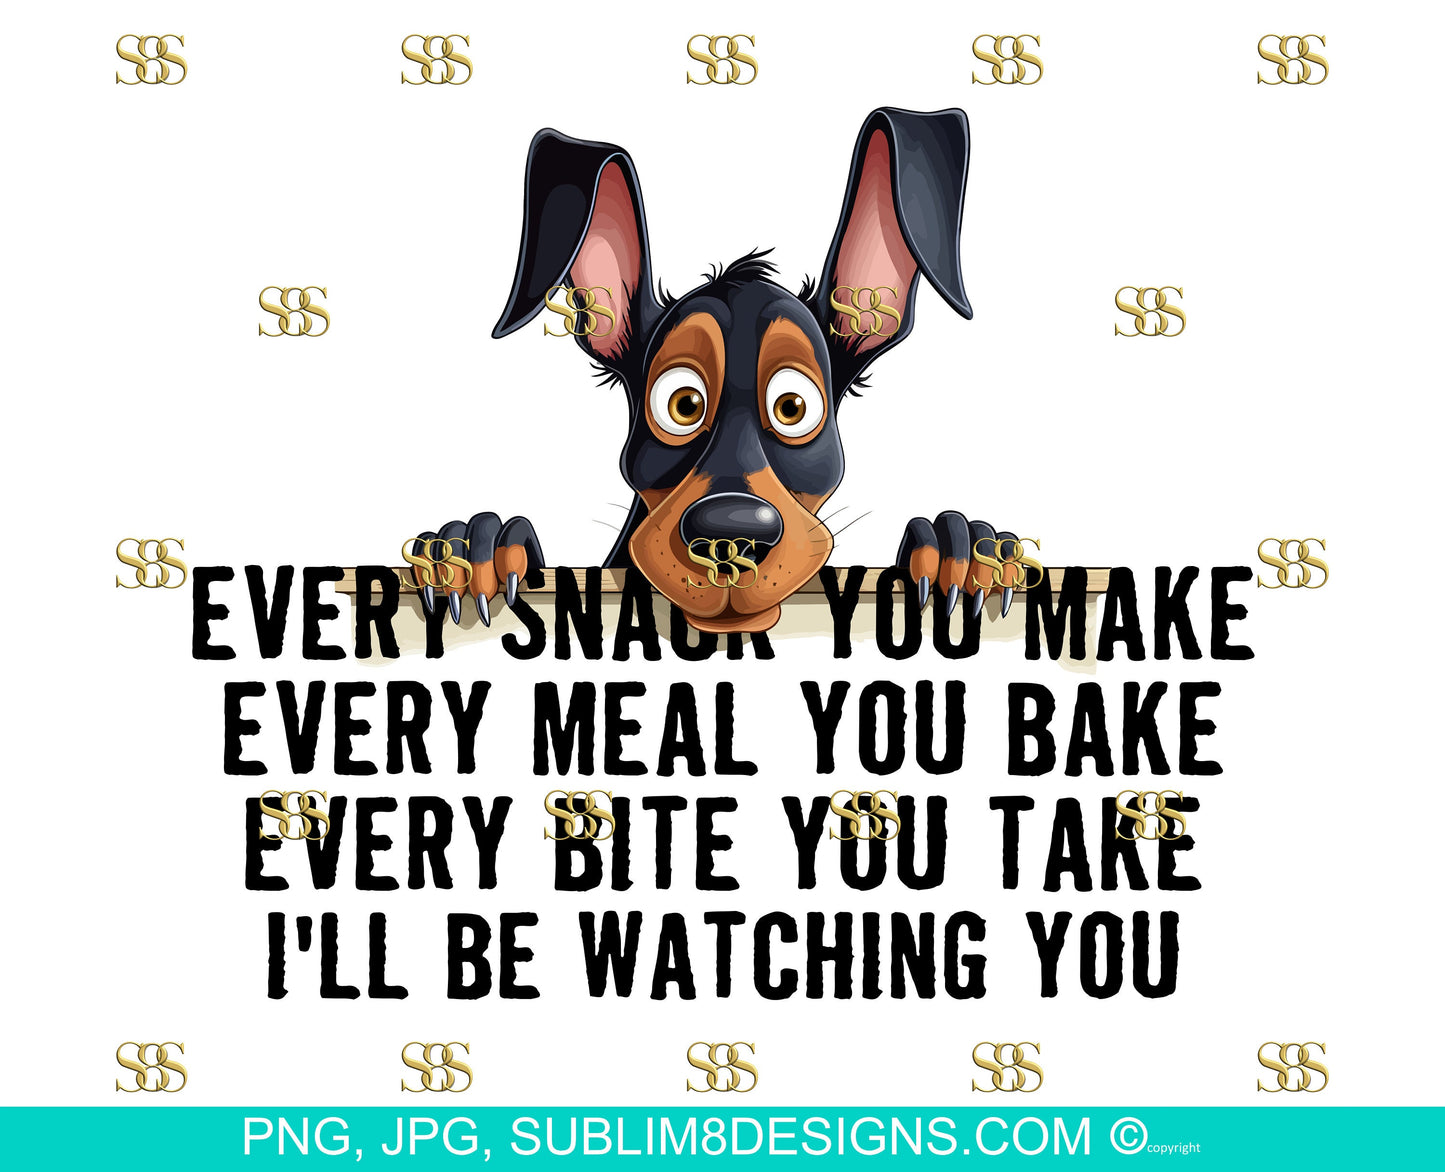 Snack-Obsessed Doberman: The Hilarious Table Peeker! Every Bite You Take I'll Be Watching You PNG and JPEG ONLY